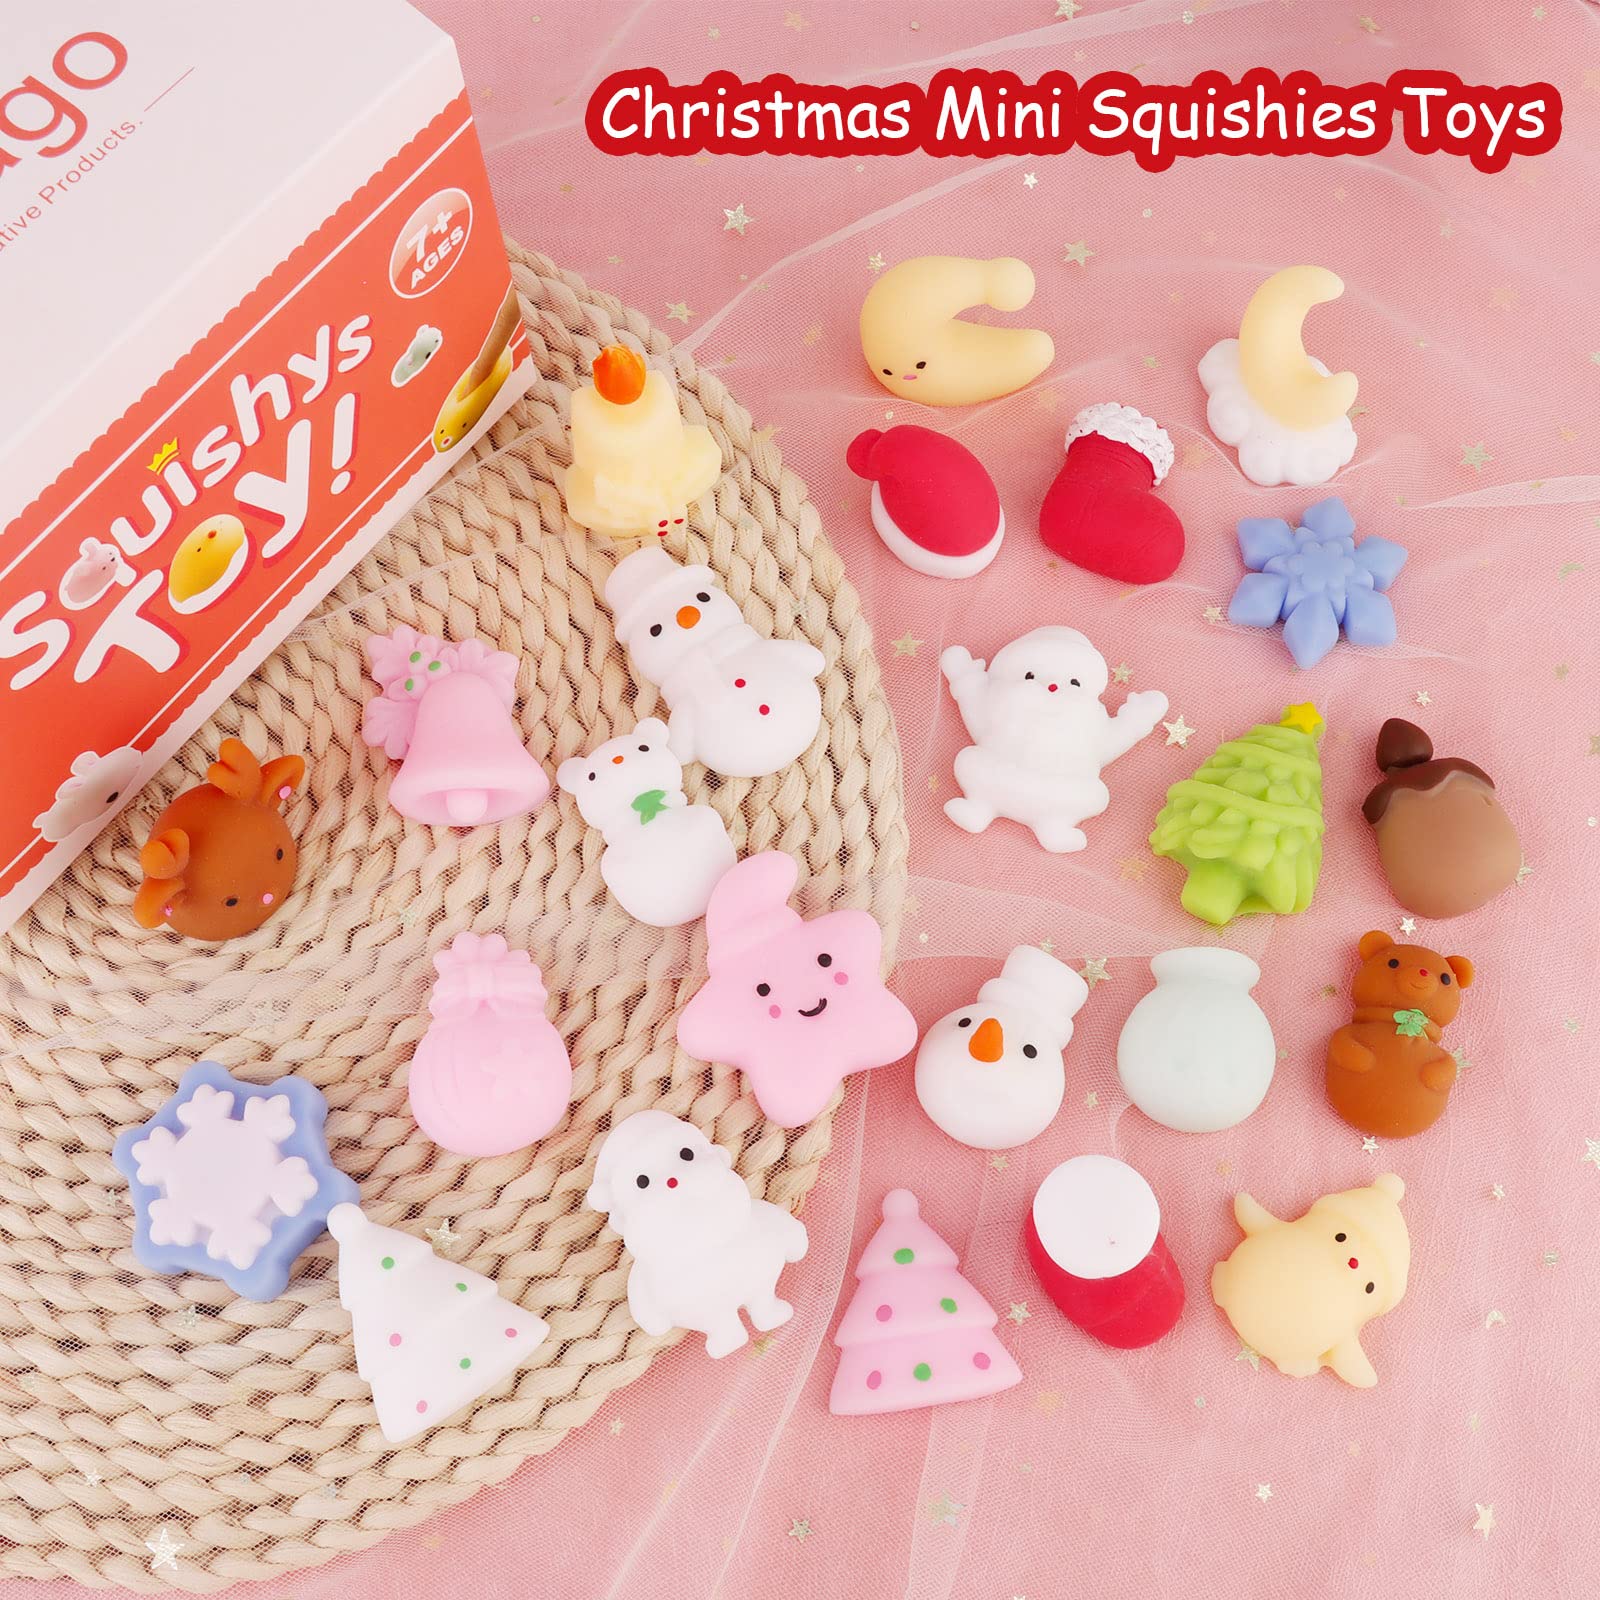 Satkago Squishies Mini Mochi Squishies Toy, 25 Pcs Mini Squishys Toys Cute Stress Reliever Toys Funny Fidget Toys Birthday Gift Party Favors for Kids